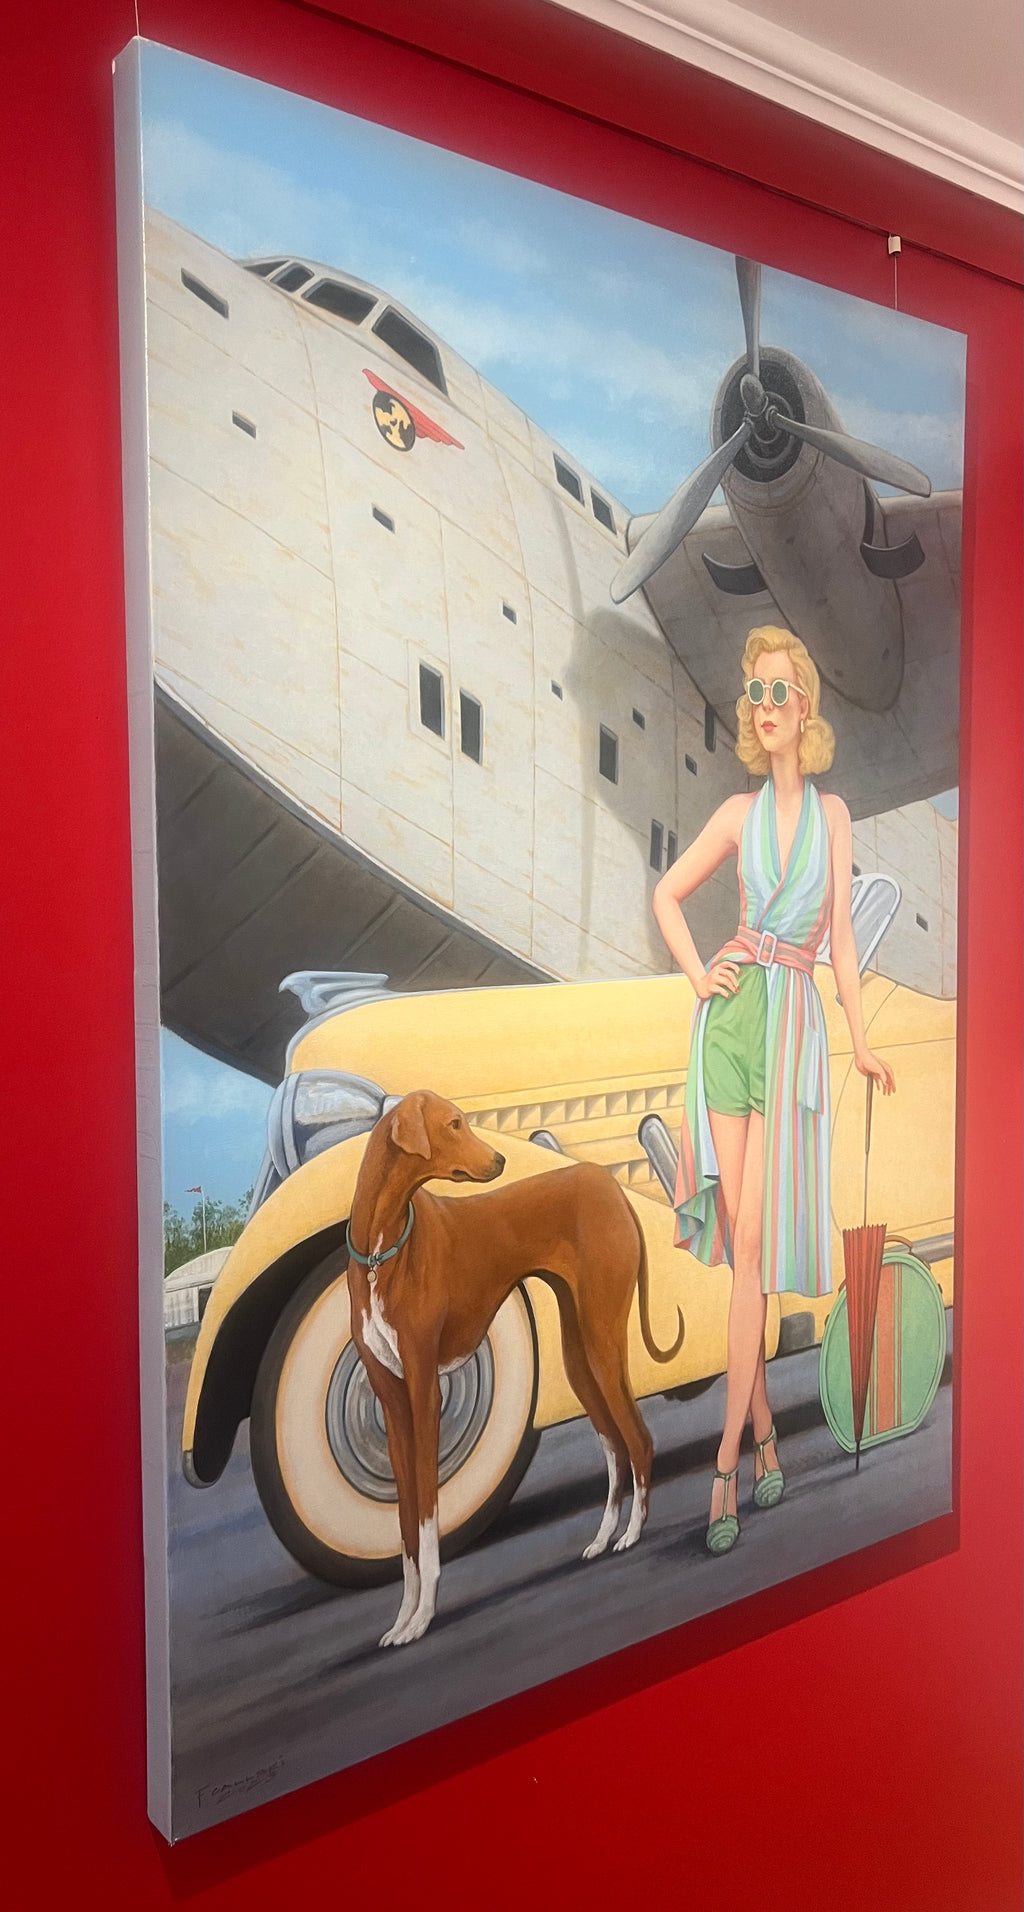 Oil painting of a blonde woman in sunglasses standing in front of a vintage yellow convertible and a Jet with brown dog